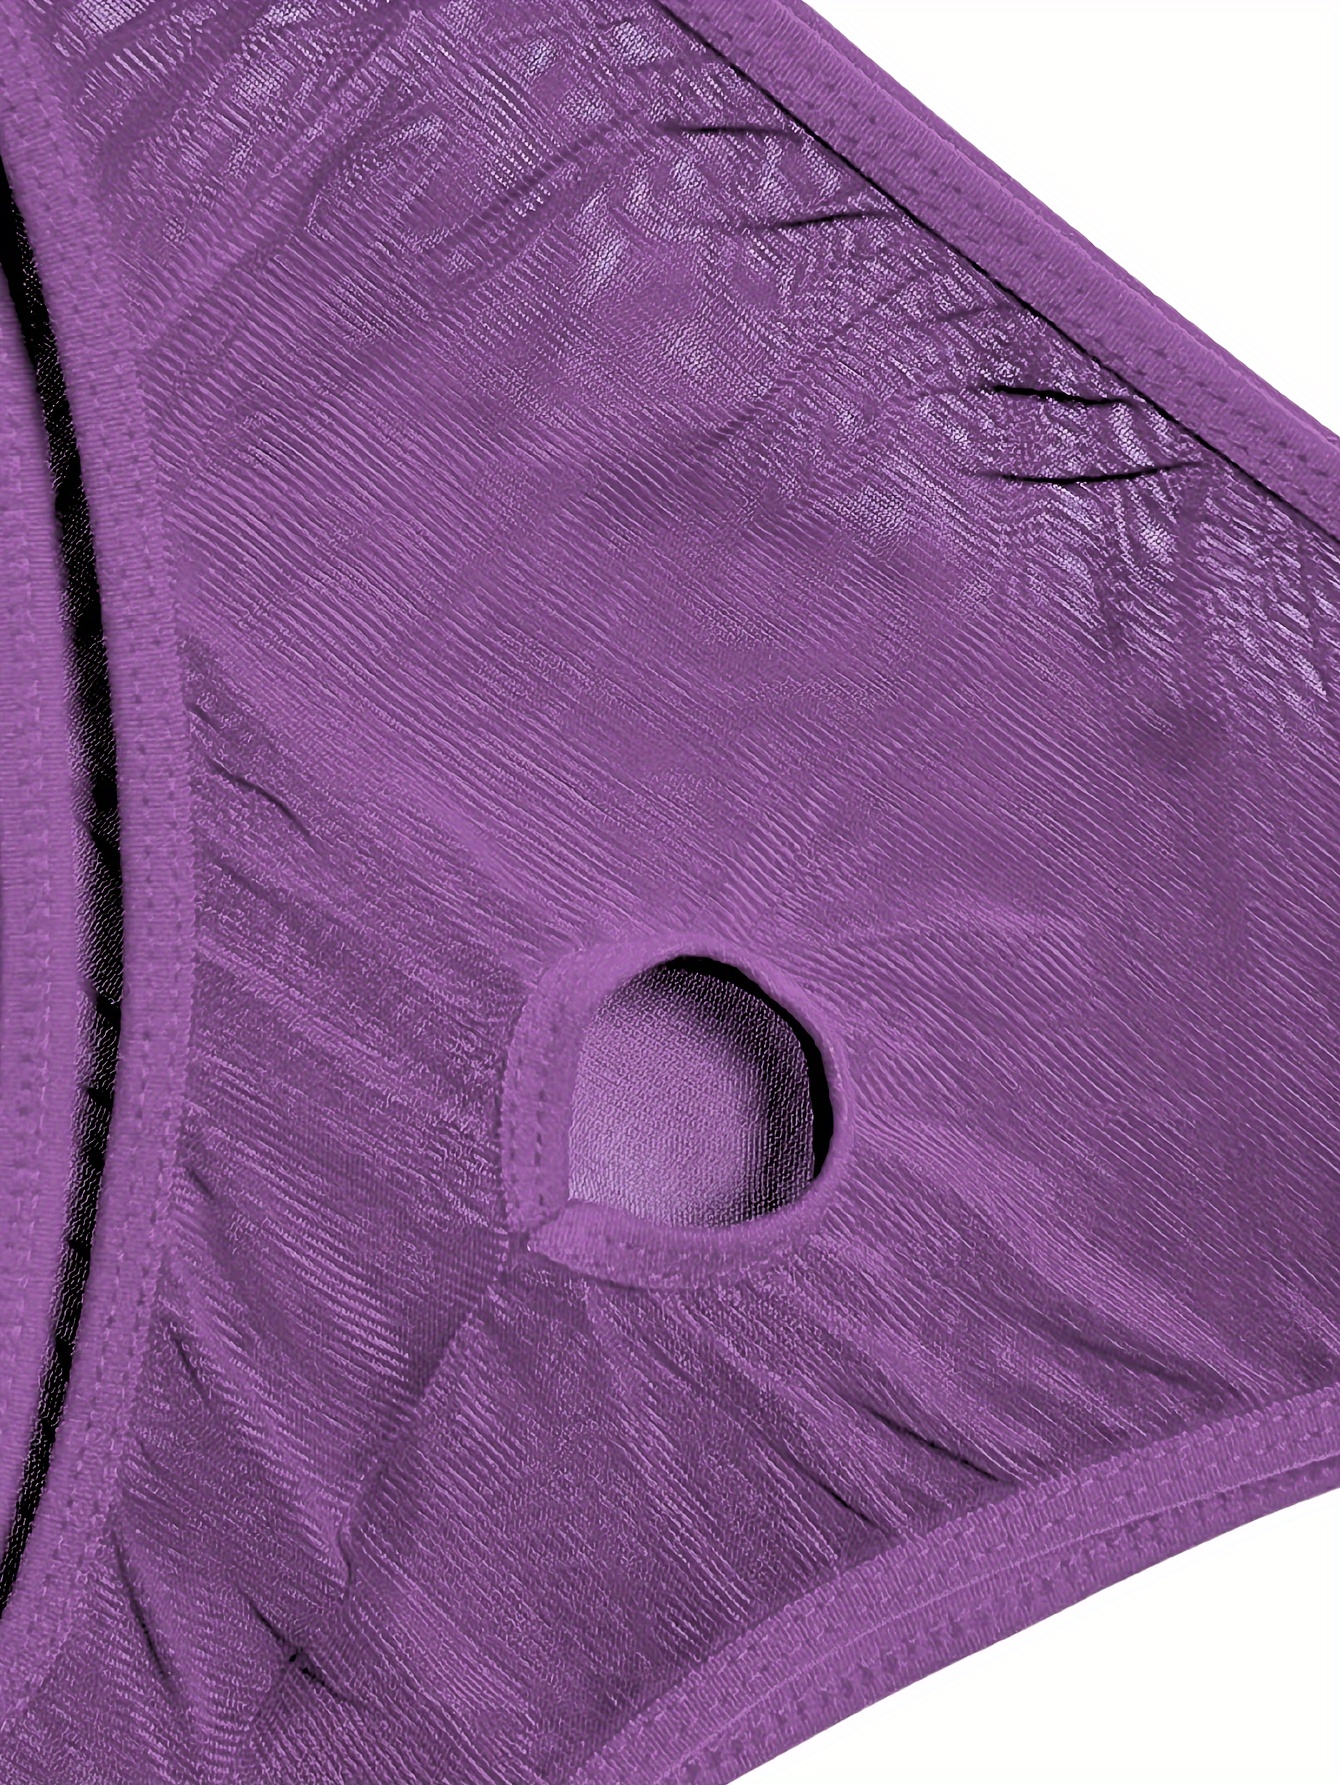 SALE - Mens Sheer See Through Show Off Mesh Front Thong Purple